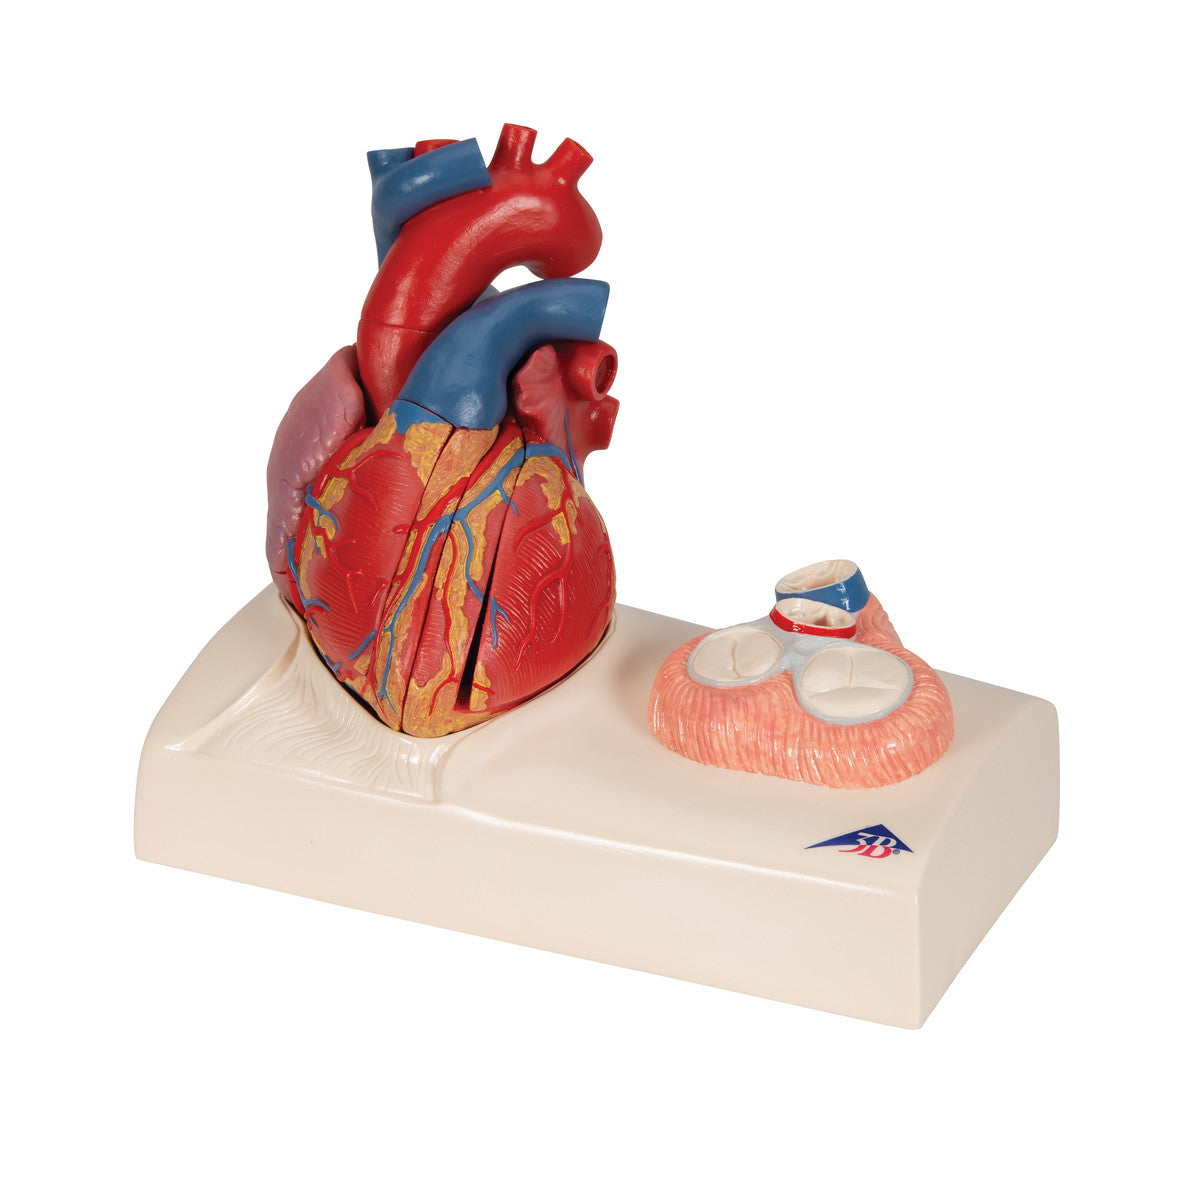 Magnetic Heart model, life-size, 5 parts - 3B G01